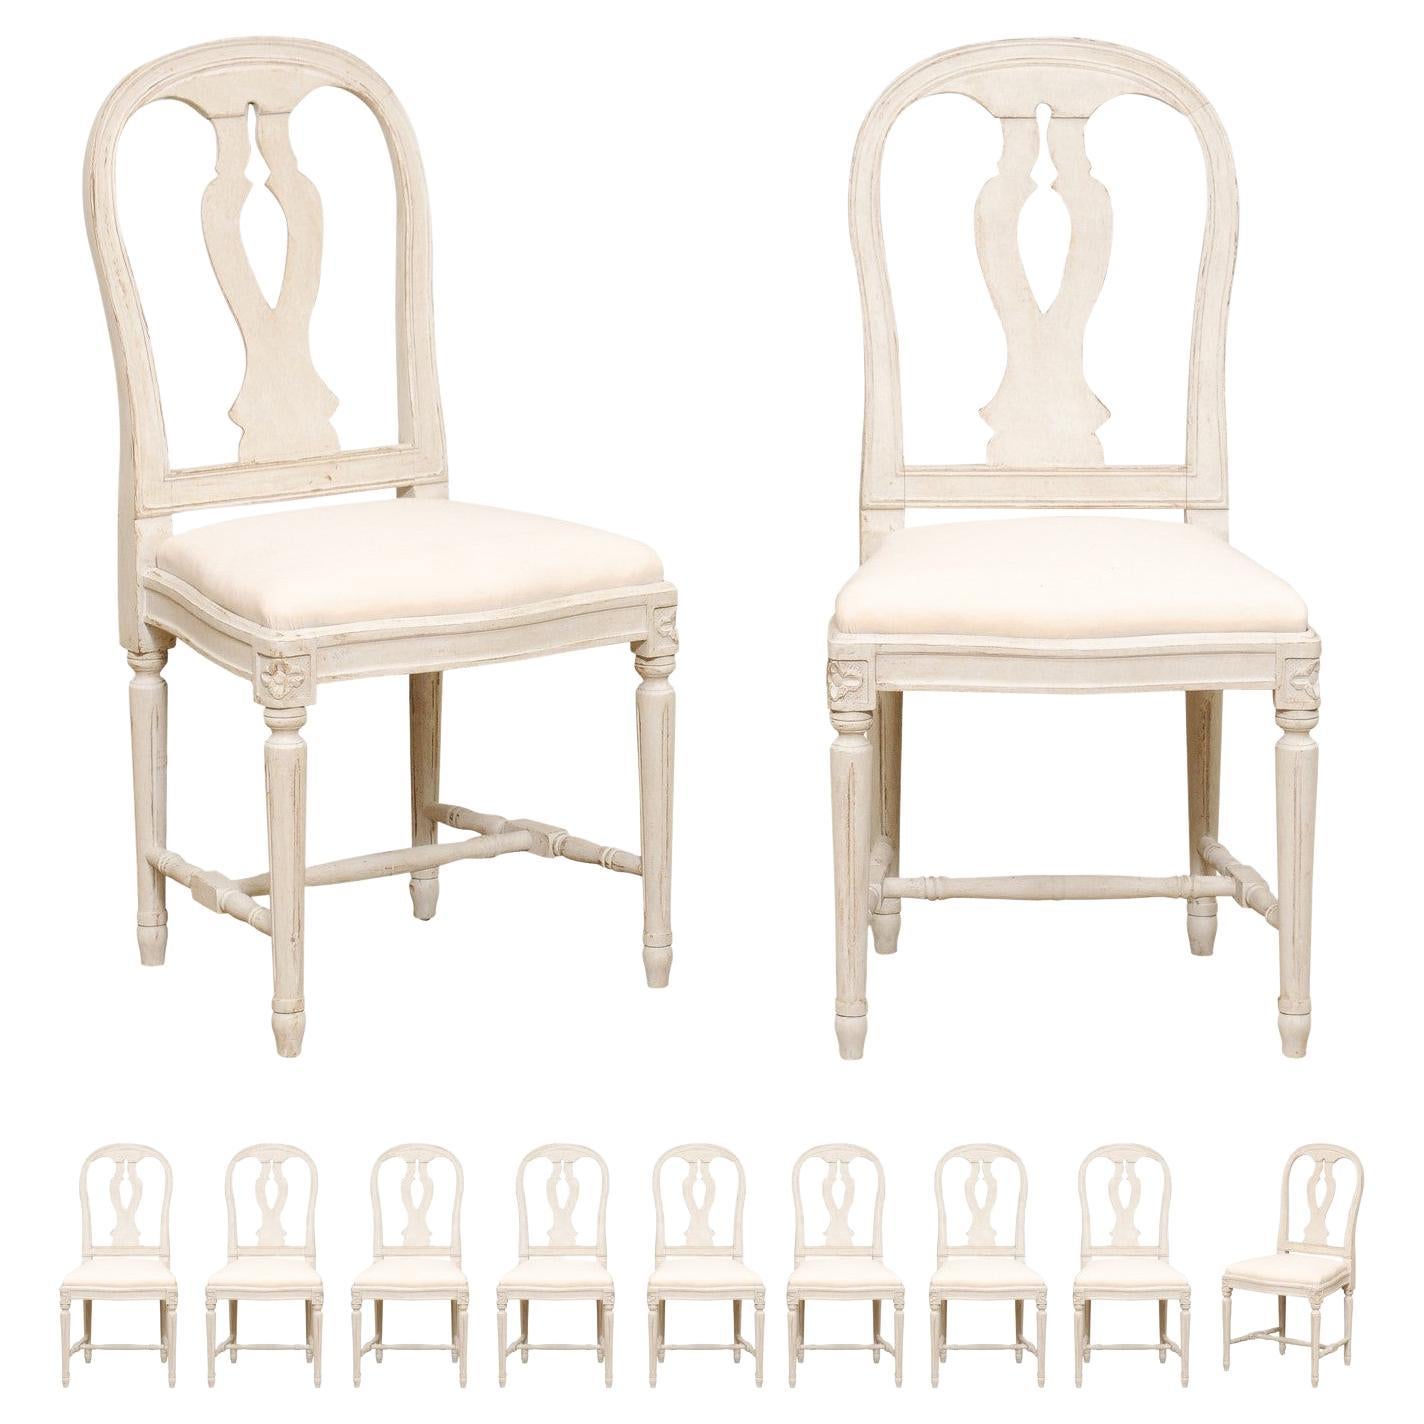 Set of 11 Swedish Painted Dining Room Chairs with Carved Splats and Upholstery For Sale